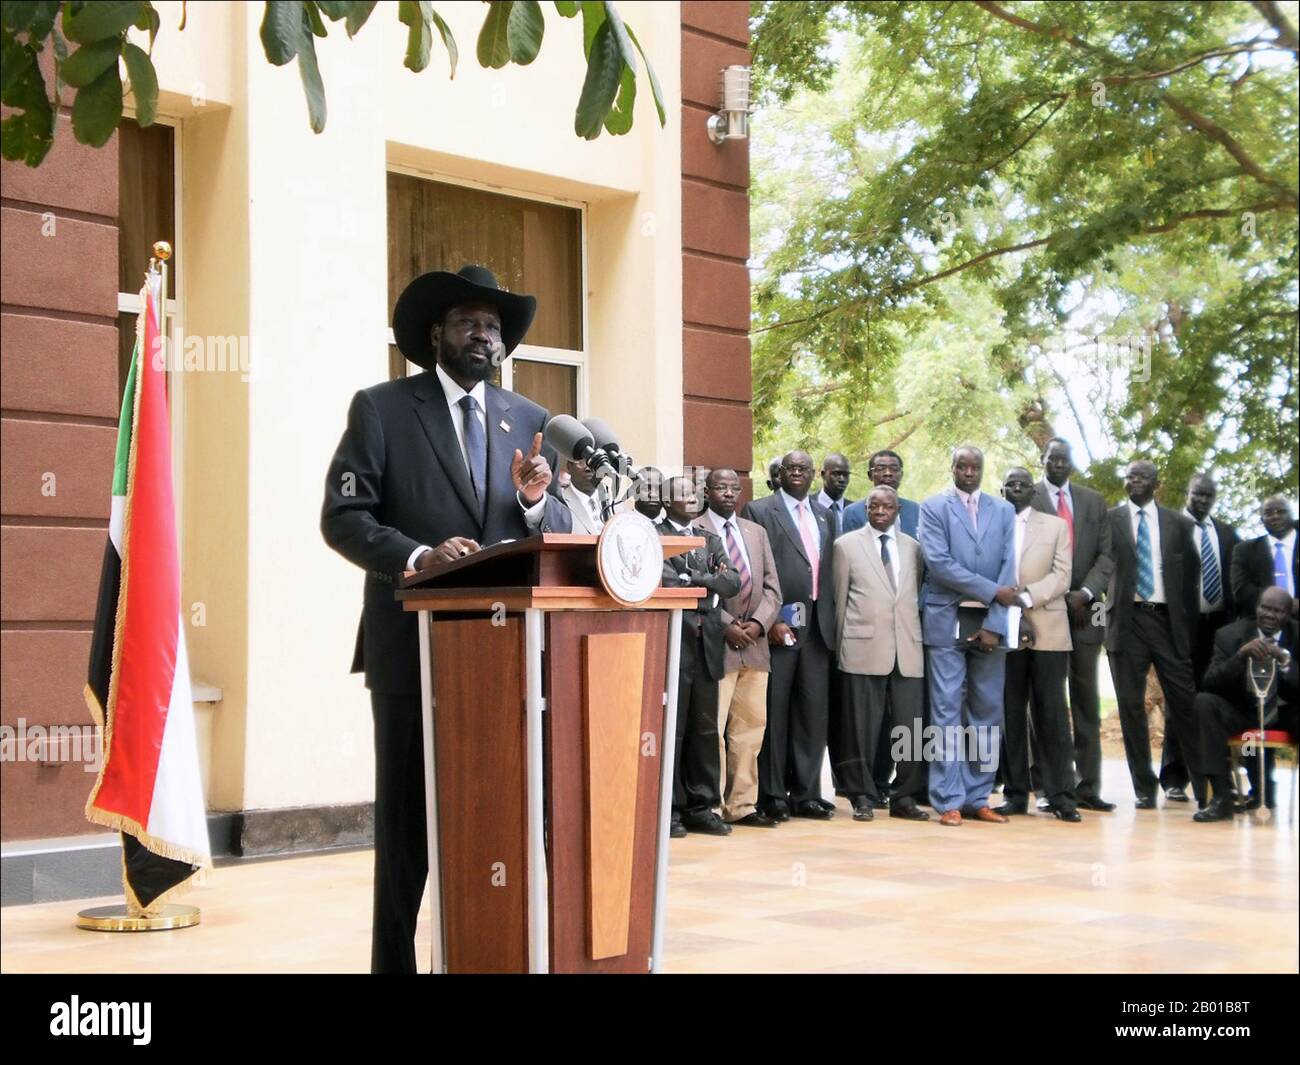 South Sudan: Salva Kiir Mayardit (13 September 1951 -), President of South Sudan, 2011.  Salva Kiir Mayardit is a Dinka, though of a different clan than former South Sudan president John Garang. In the late 1960s, Kiir joined the Anyanya in the First Sudanese Civil War. By the time of the 1972 Addis Ababa Agreement, he was a low-ranking officer. In 1983, when Garang joined an army mutiny he had been sent to put down, Kiir and other Southern leaders joined the rebel Sudan People's Liberation Movement (SPLM) in the second civil war. Kiir eventually rose to head the SPLA's military wing. Stock Photo